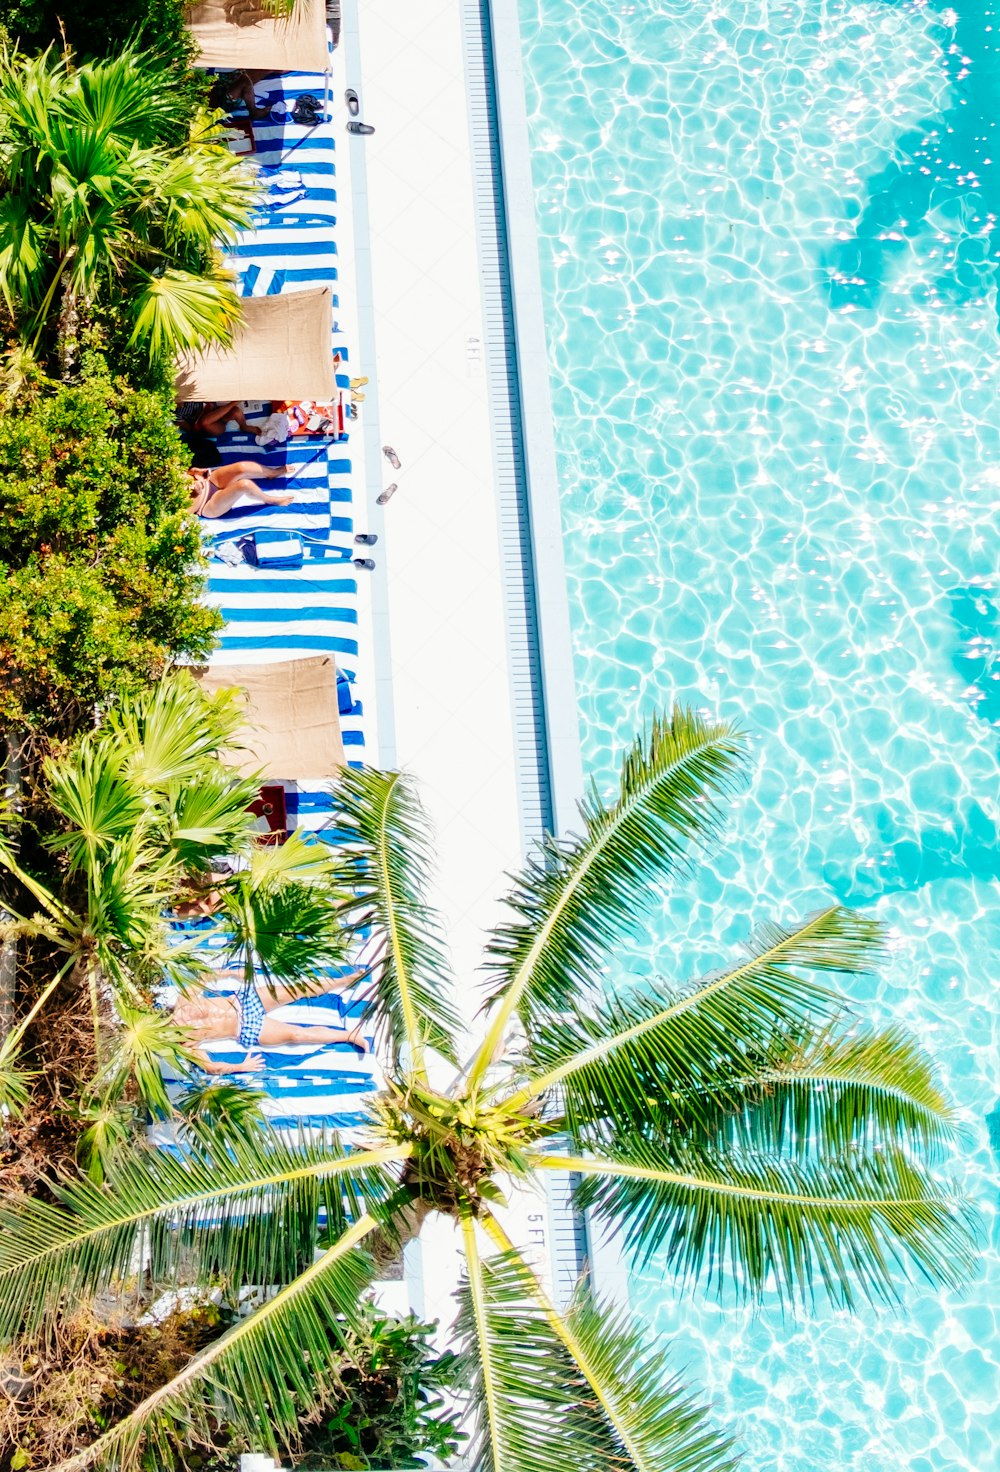 aerial photo of green palm tree beside blue swimming pool at daytime